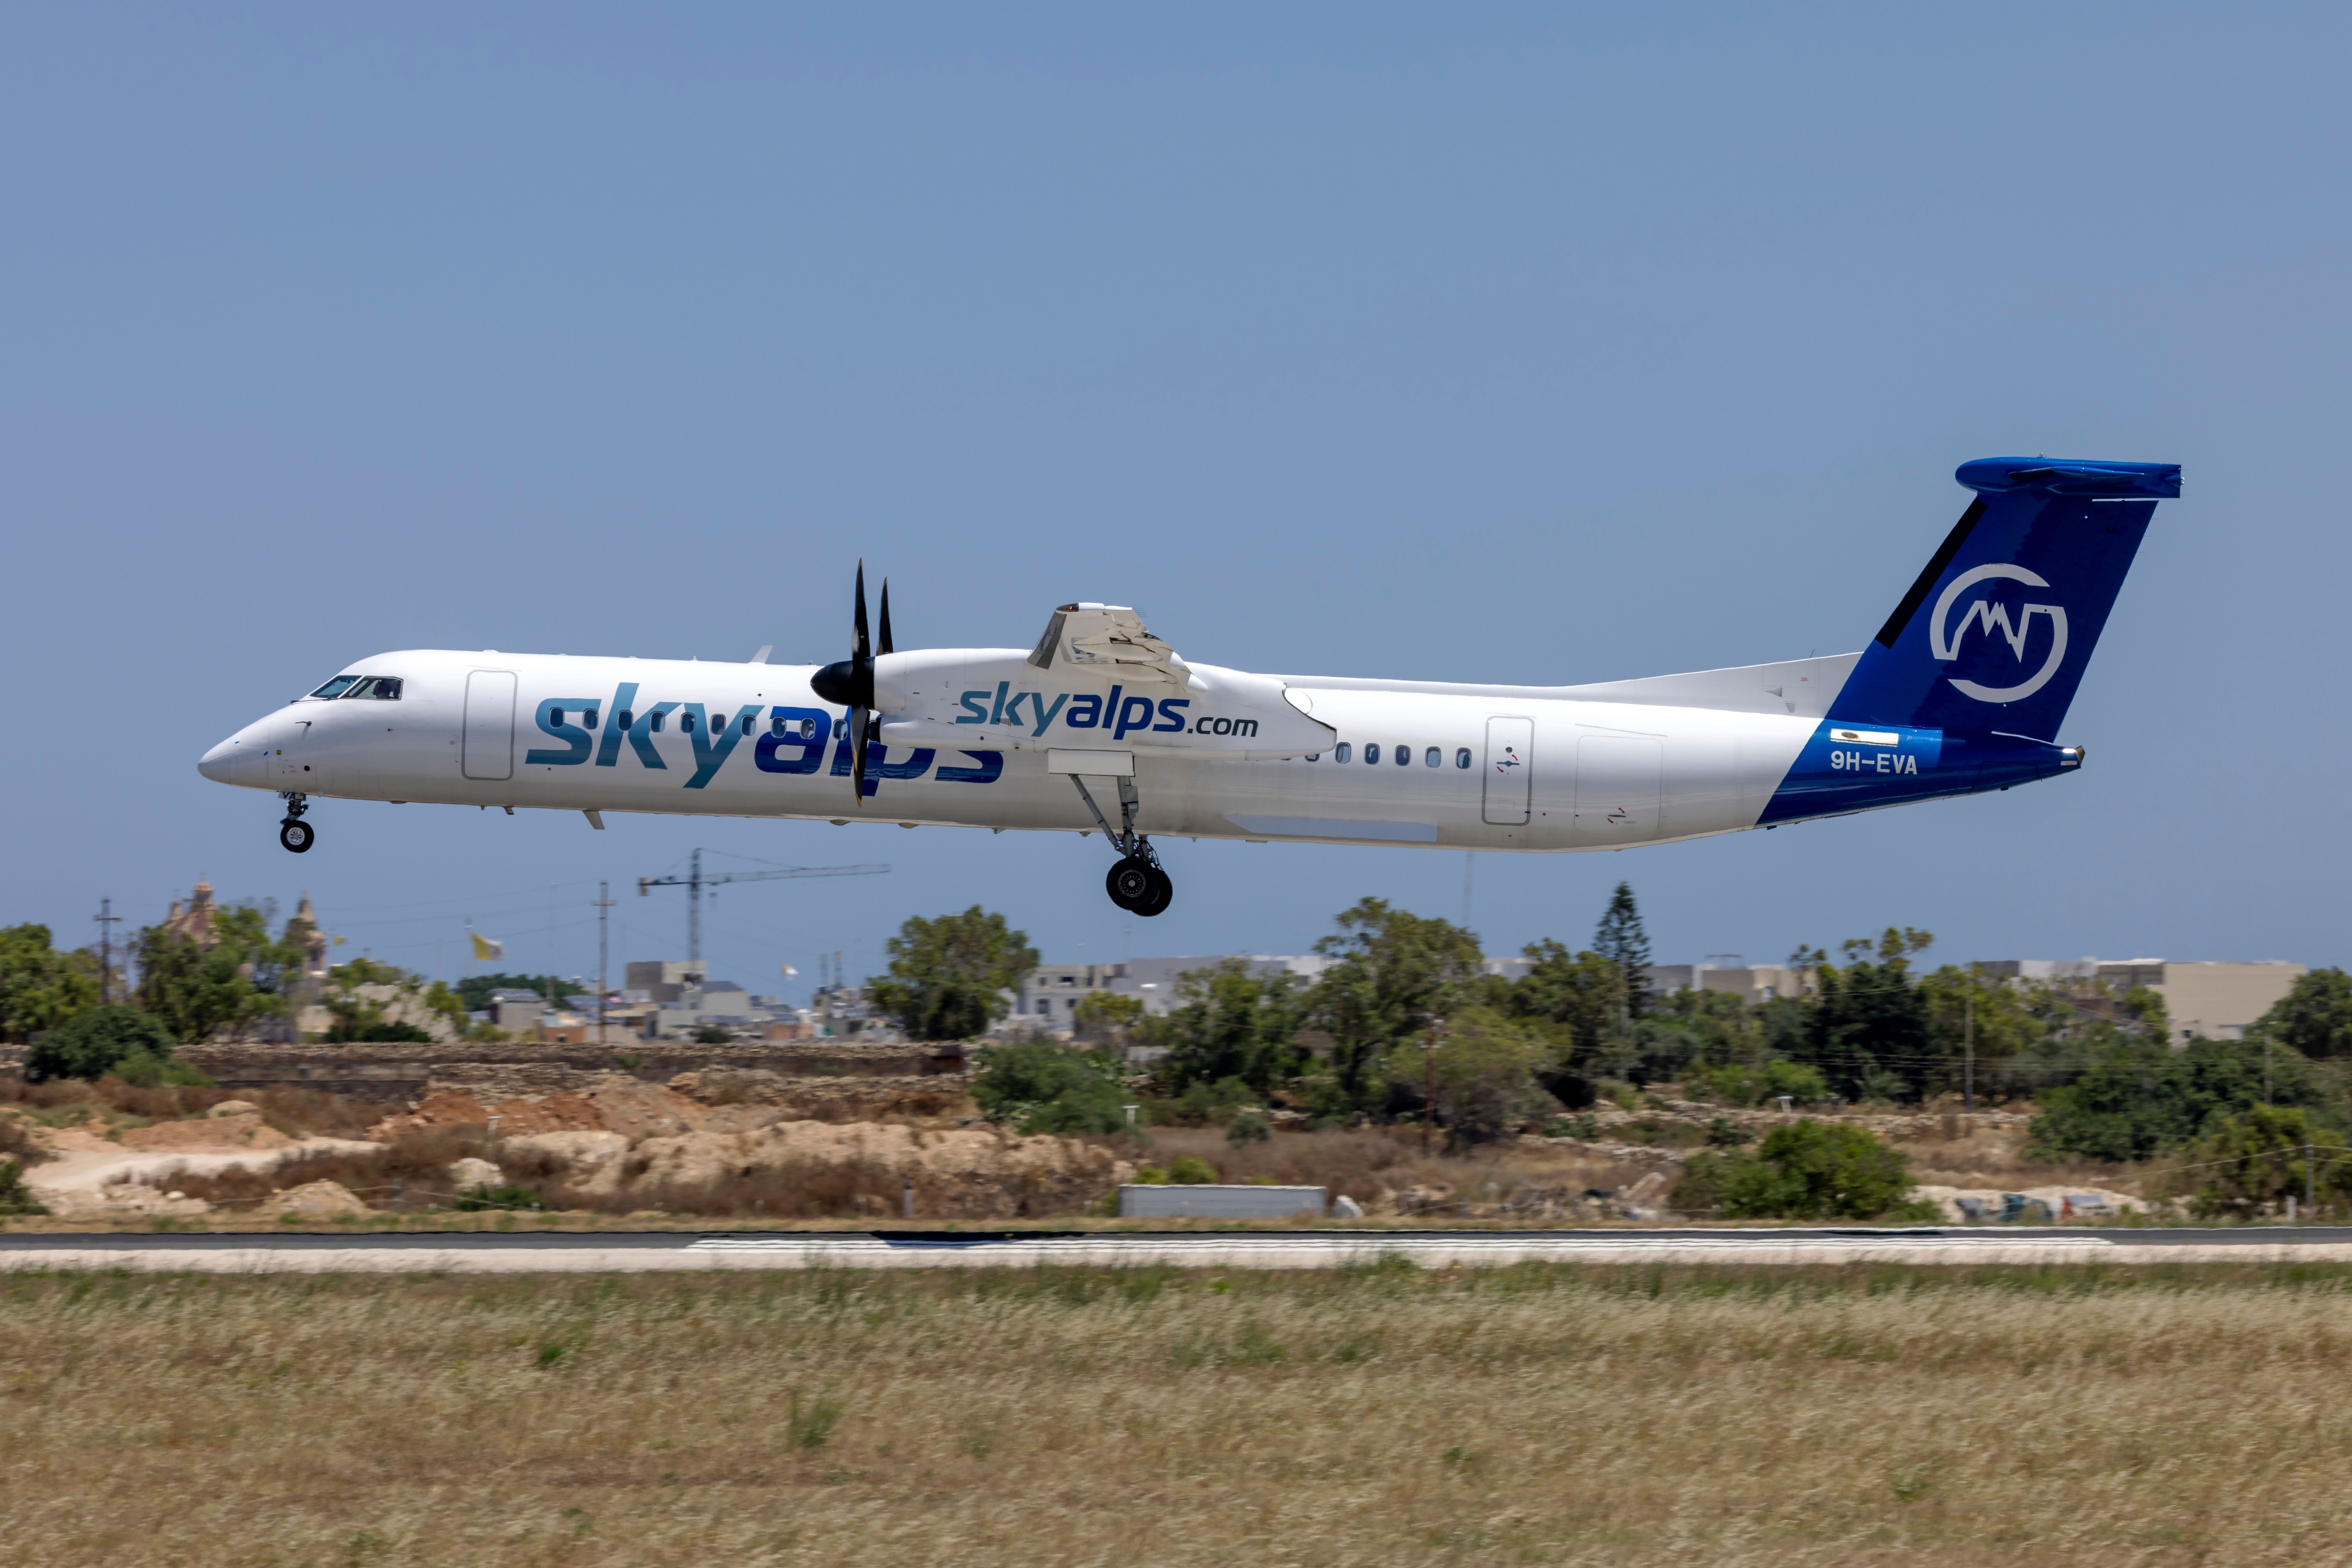 A SkyAlps Dash 8 about to land.